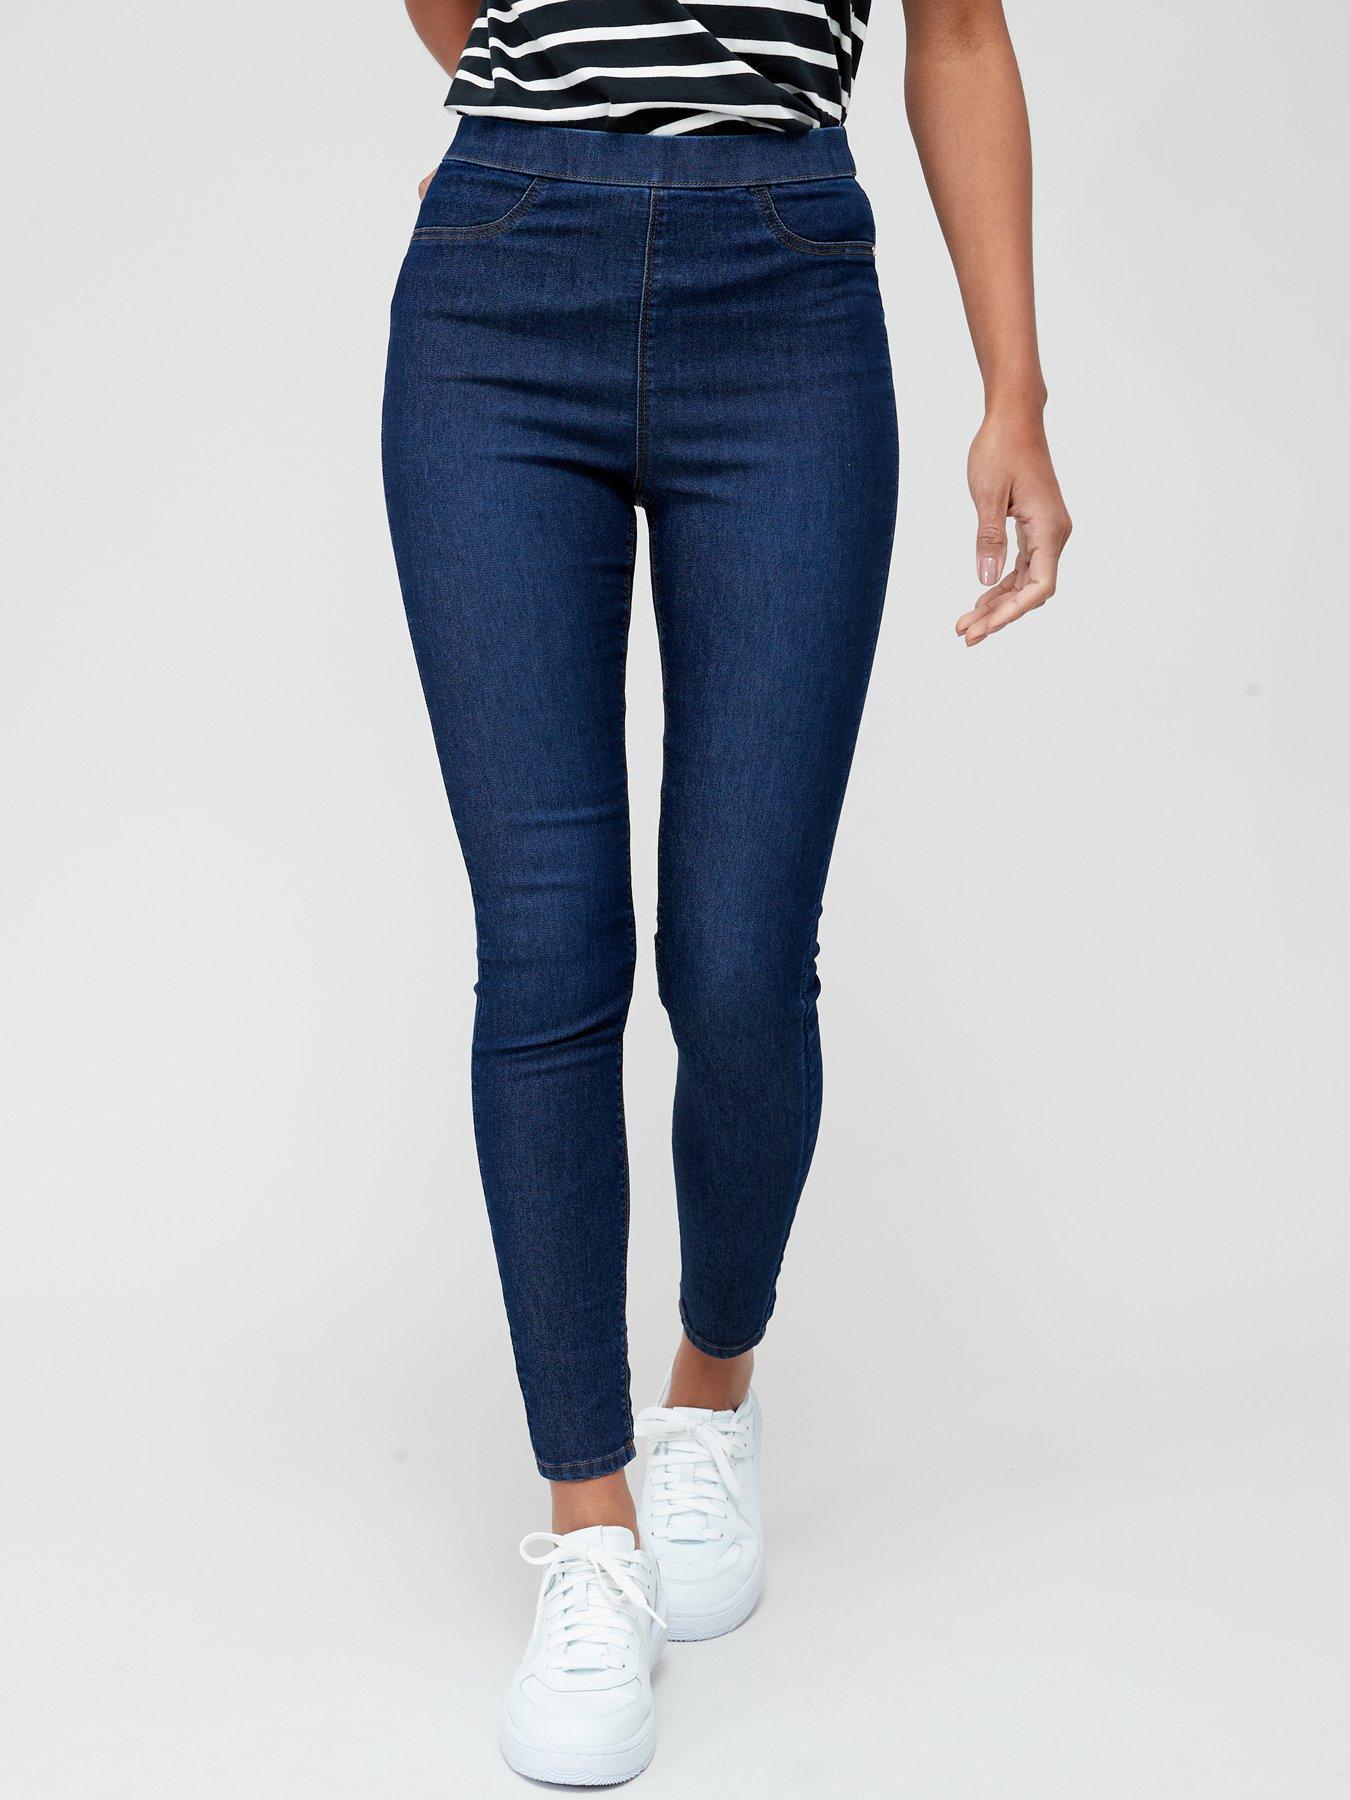 Lands' End Women's High Waisted Pull-on Legging Jeans Deep